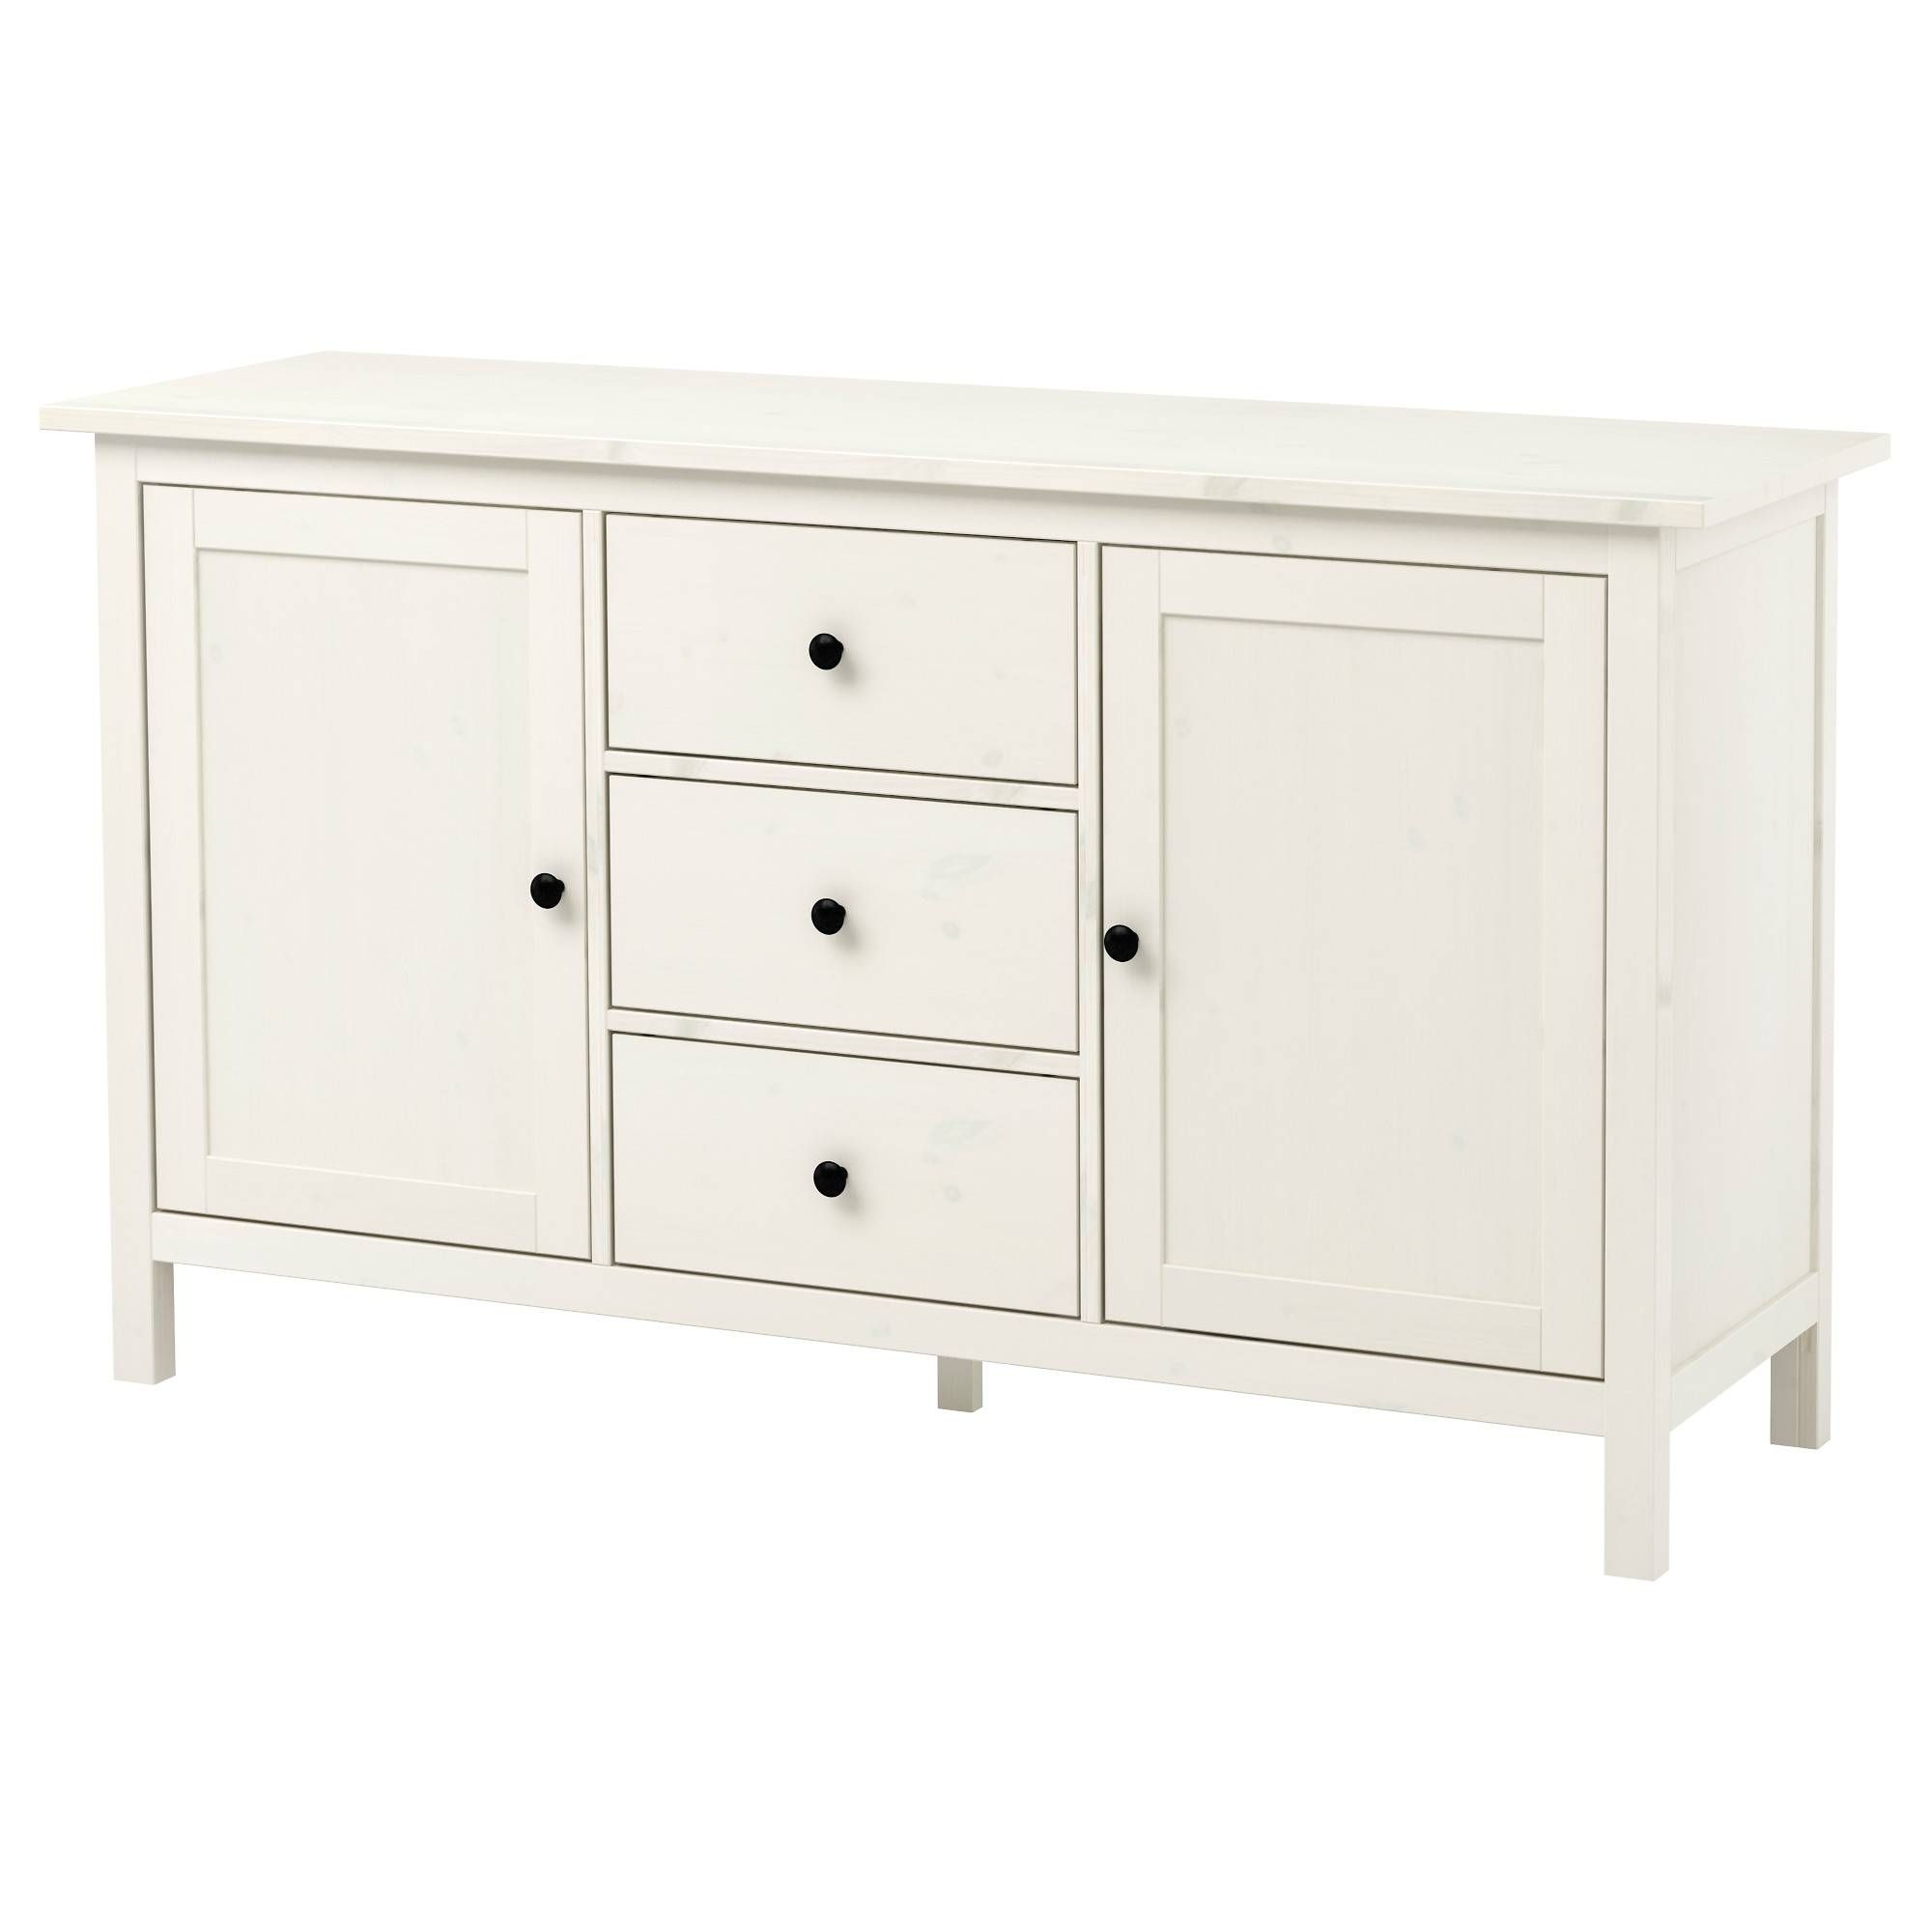 Cabinets & Console Tables – Ikea With Regard To White Sideboards For Sale (View 2 of 30)